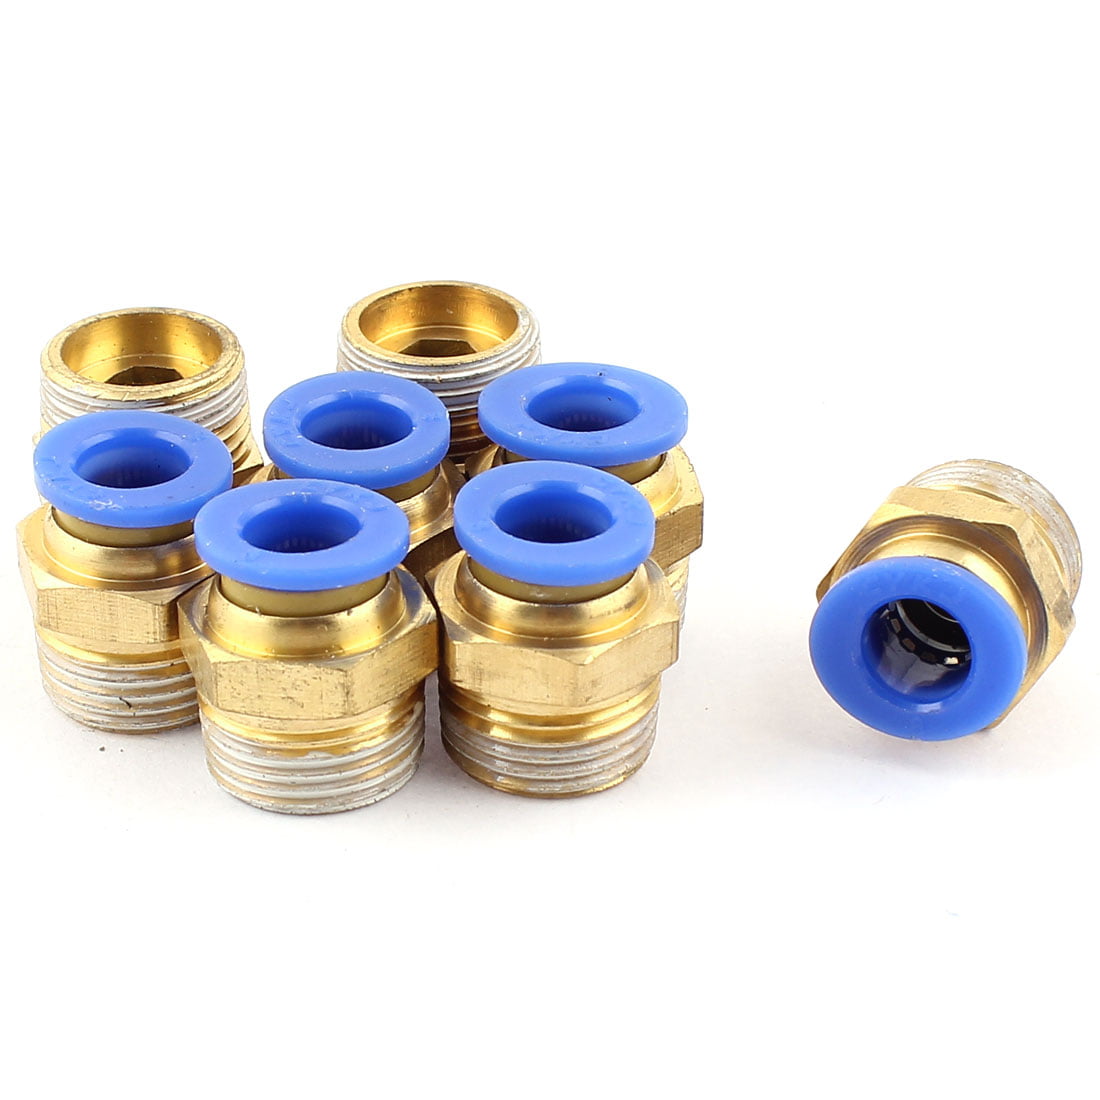 Tube OD 8mm x 3/8BSP Push In Quick Release Air Fitting Connector 5pcs 